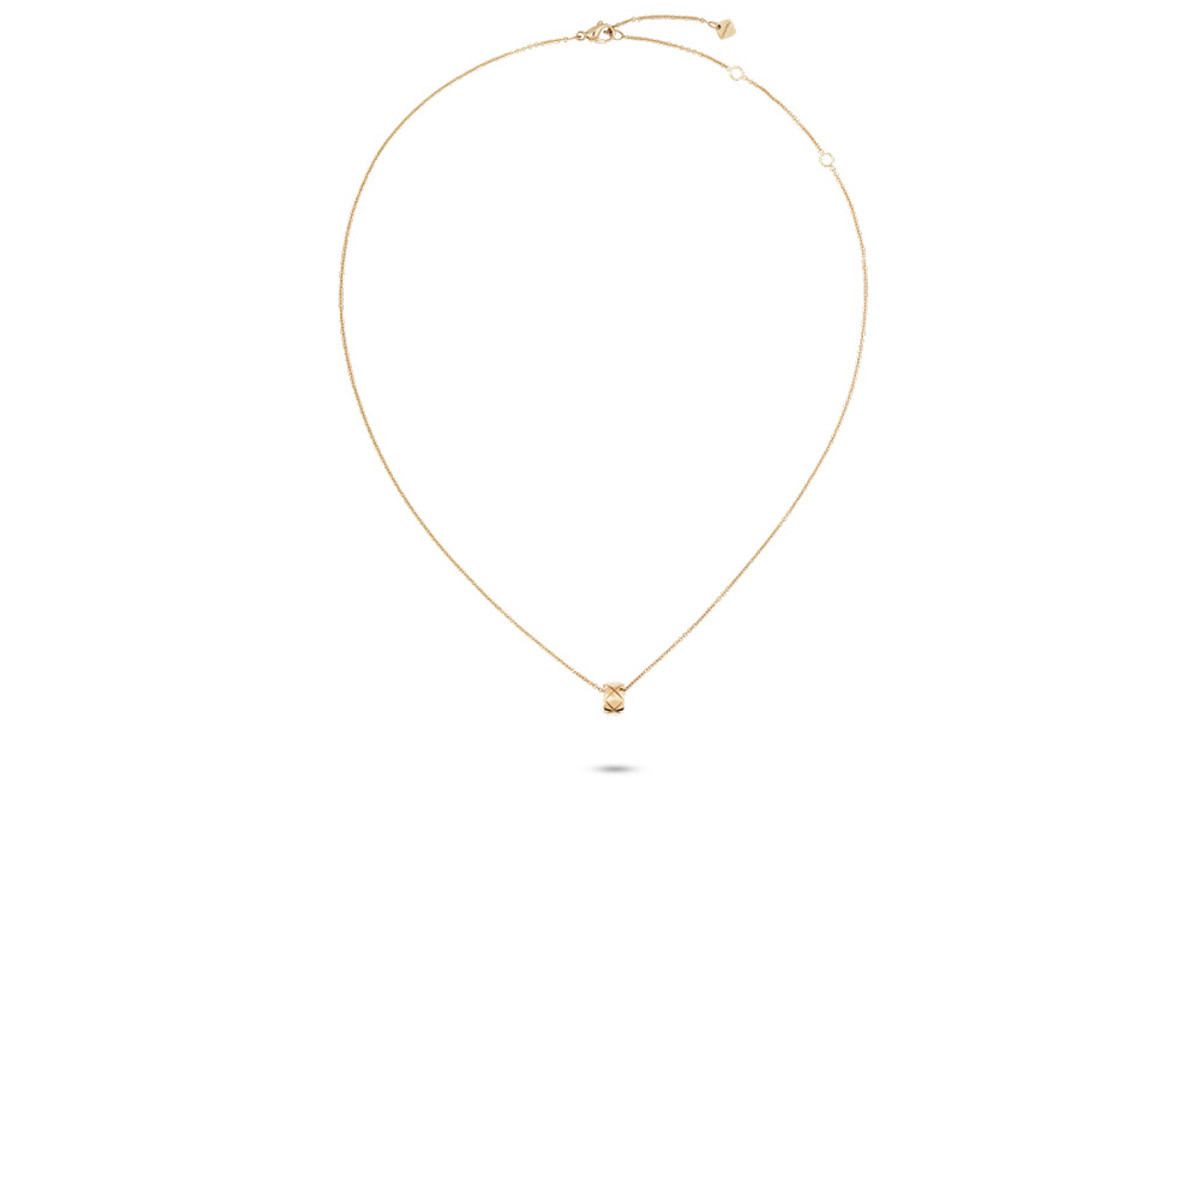 CHANEL COCO CRUSH Necklace-48859 Product Image